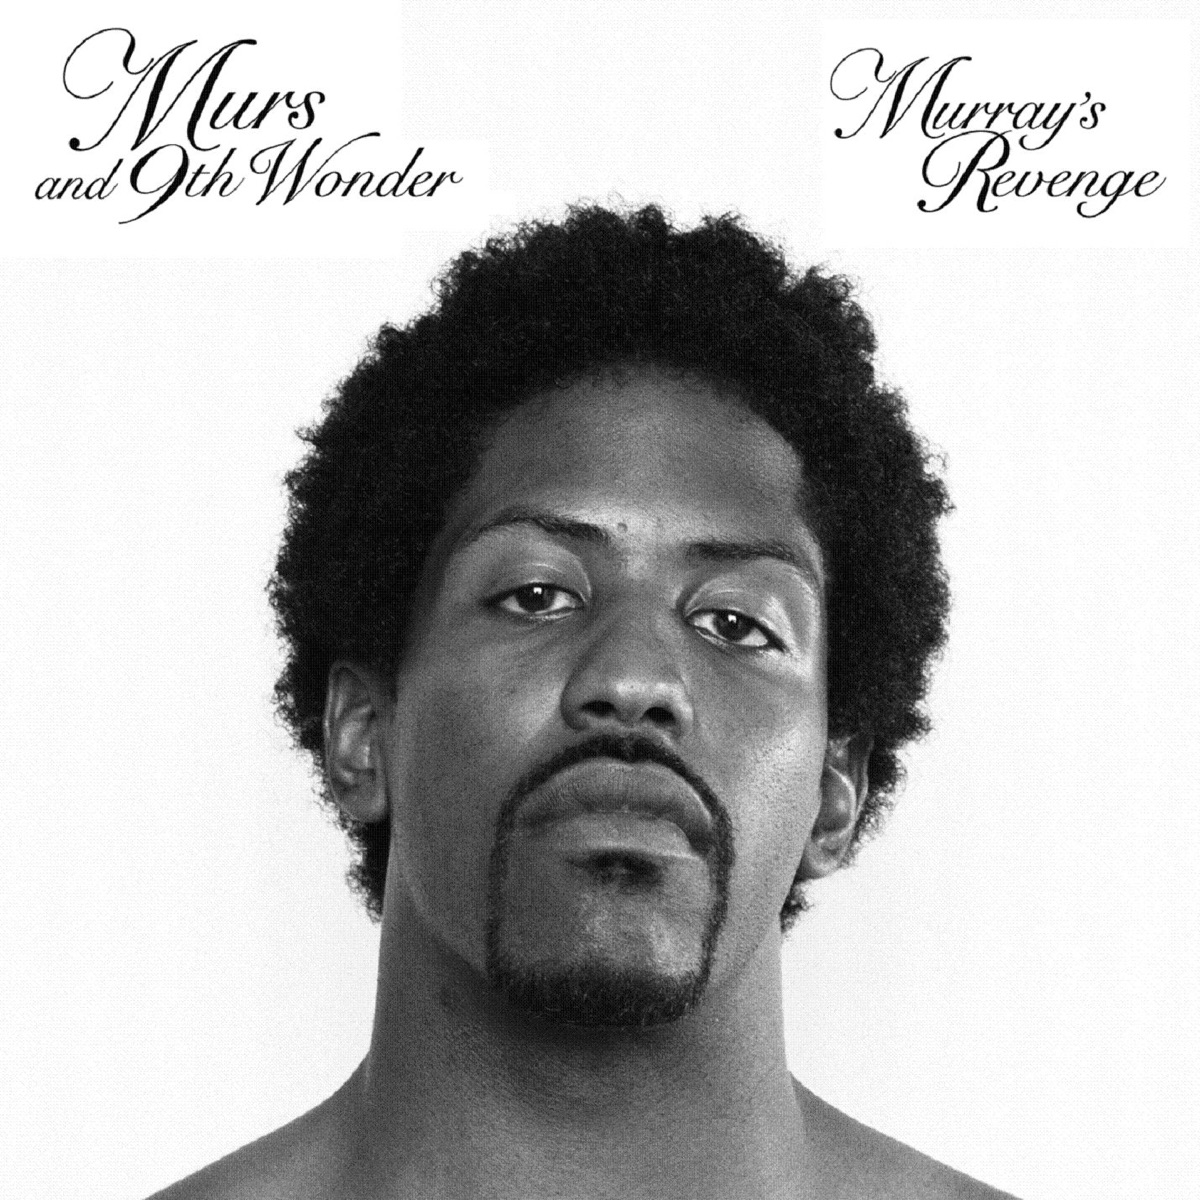 Murs 3:16: The 9th Edition - Album by Murs - Apple Music